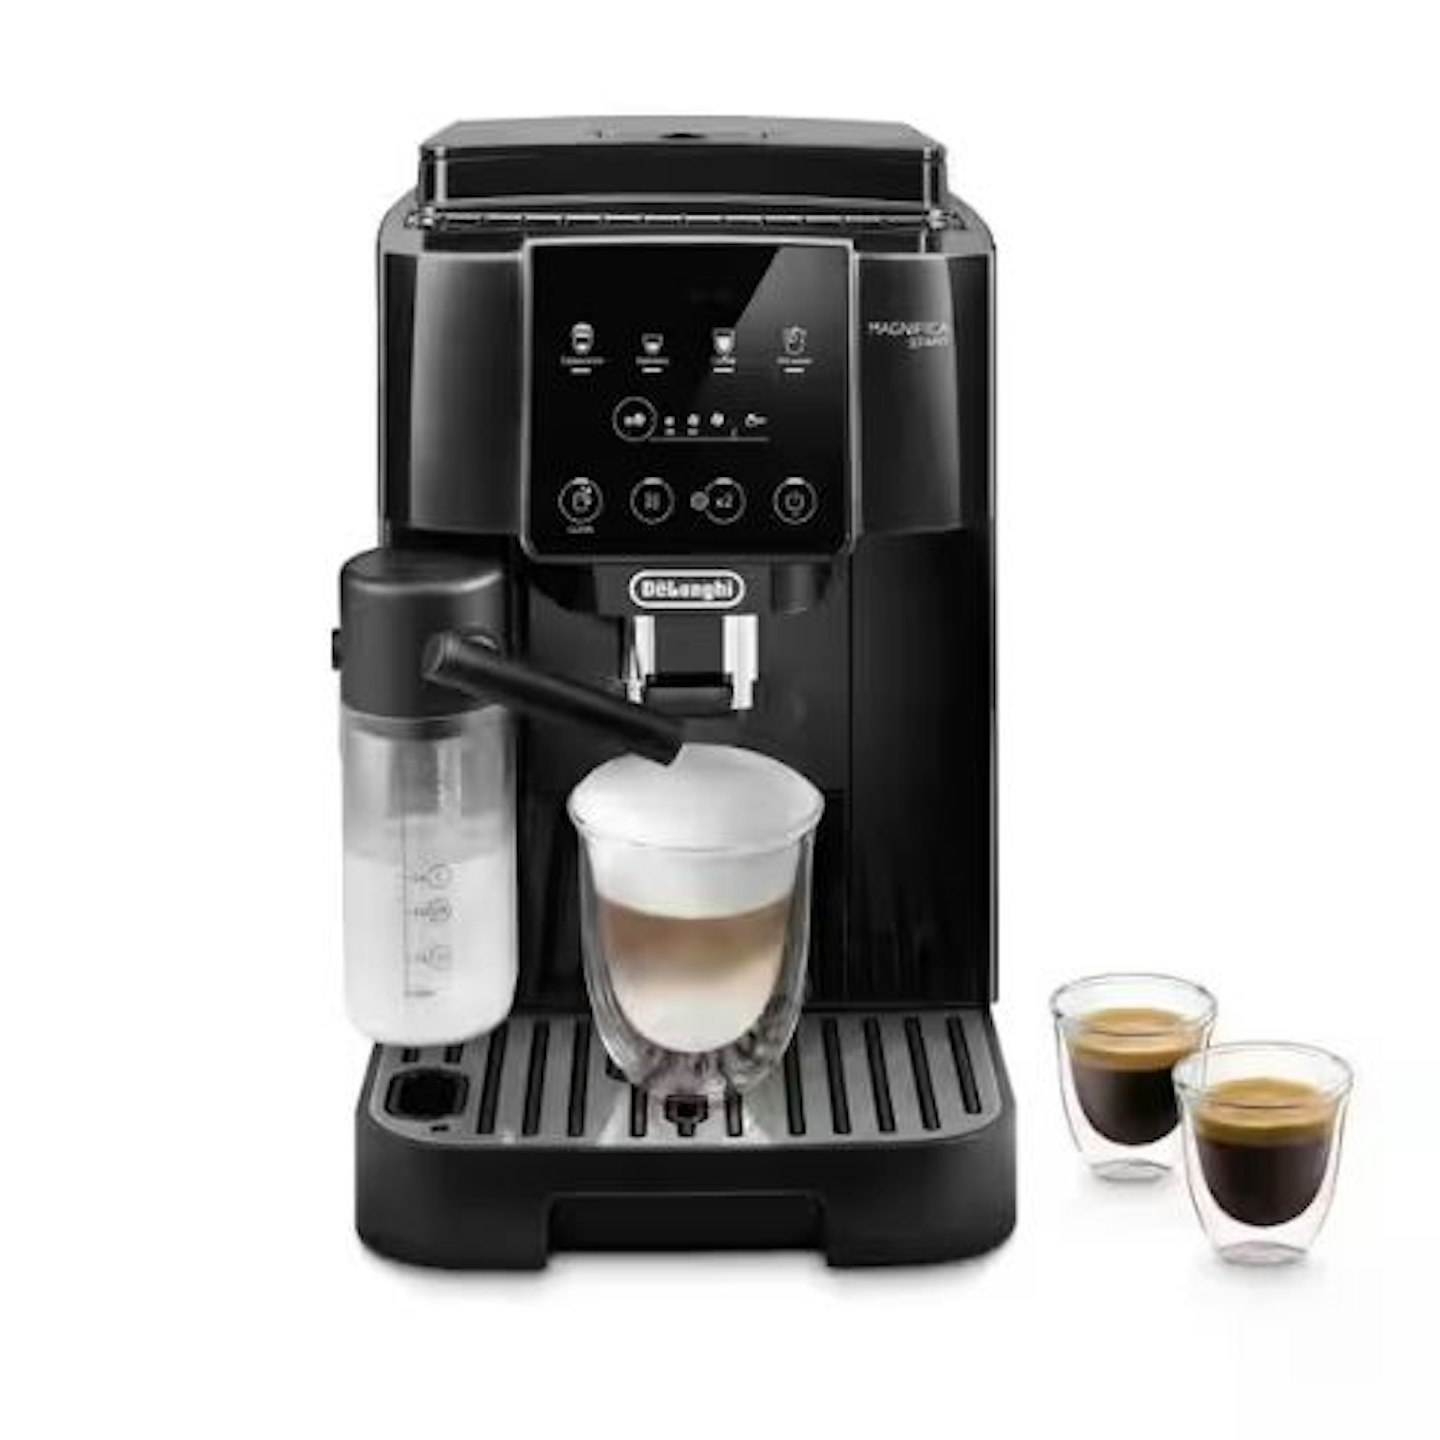 Magnifica Start Fully Automatic Bean-to-Cup Coffee Machine